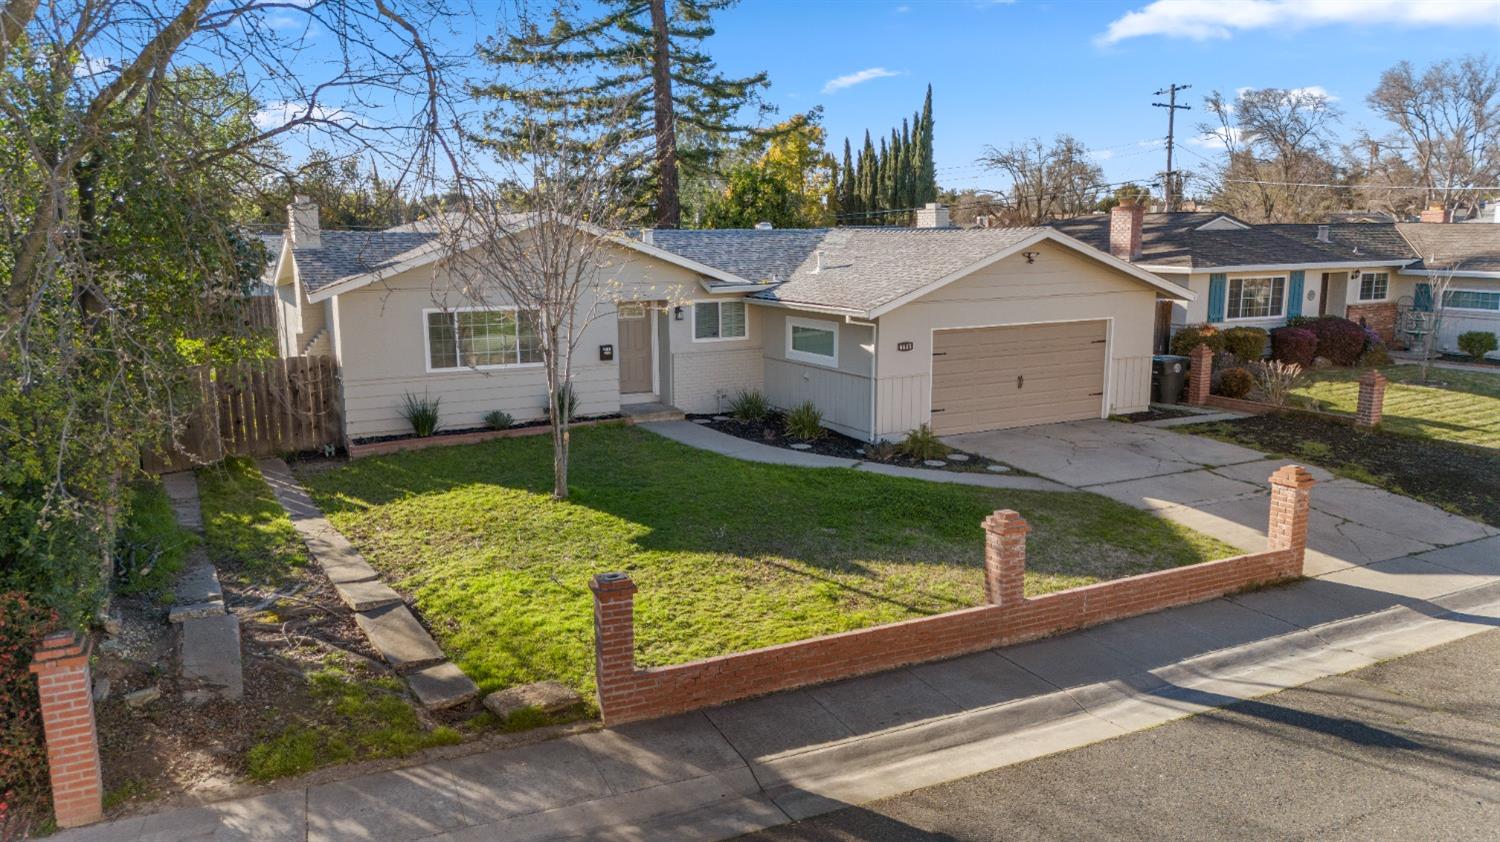 Photo of 6645 Melbourne Wy in Citrus Heights, CA